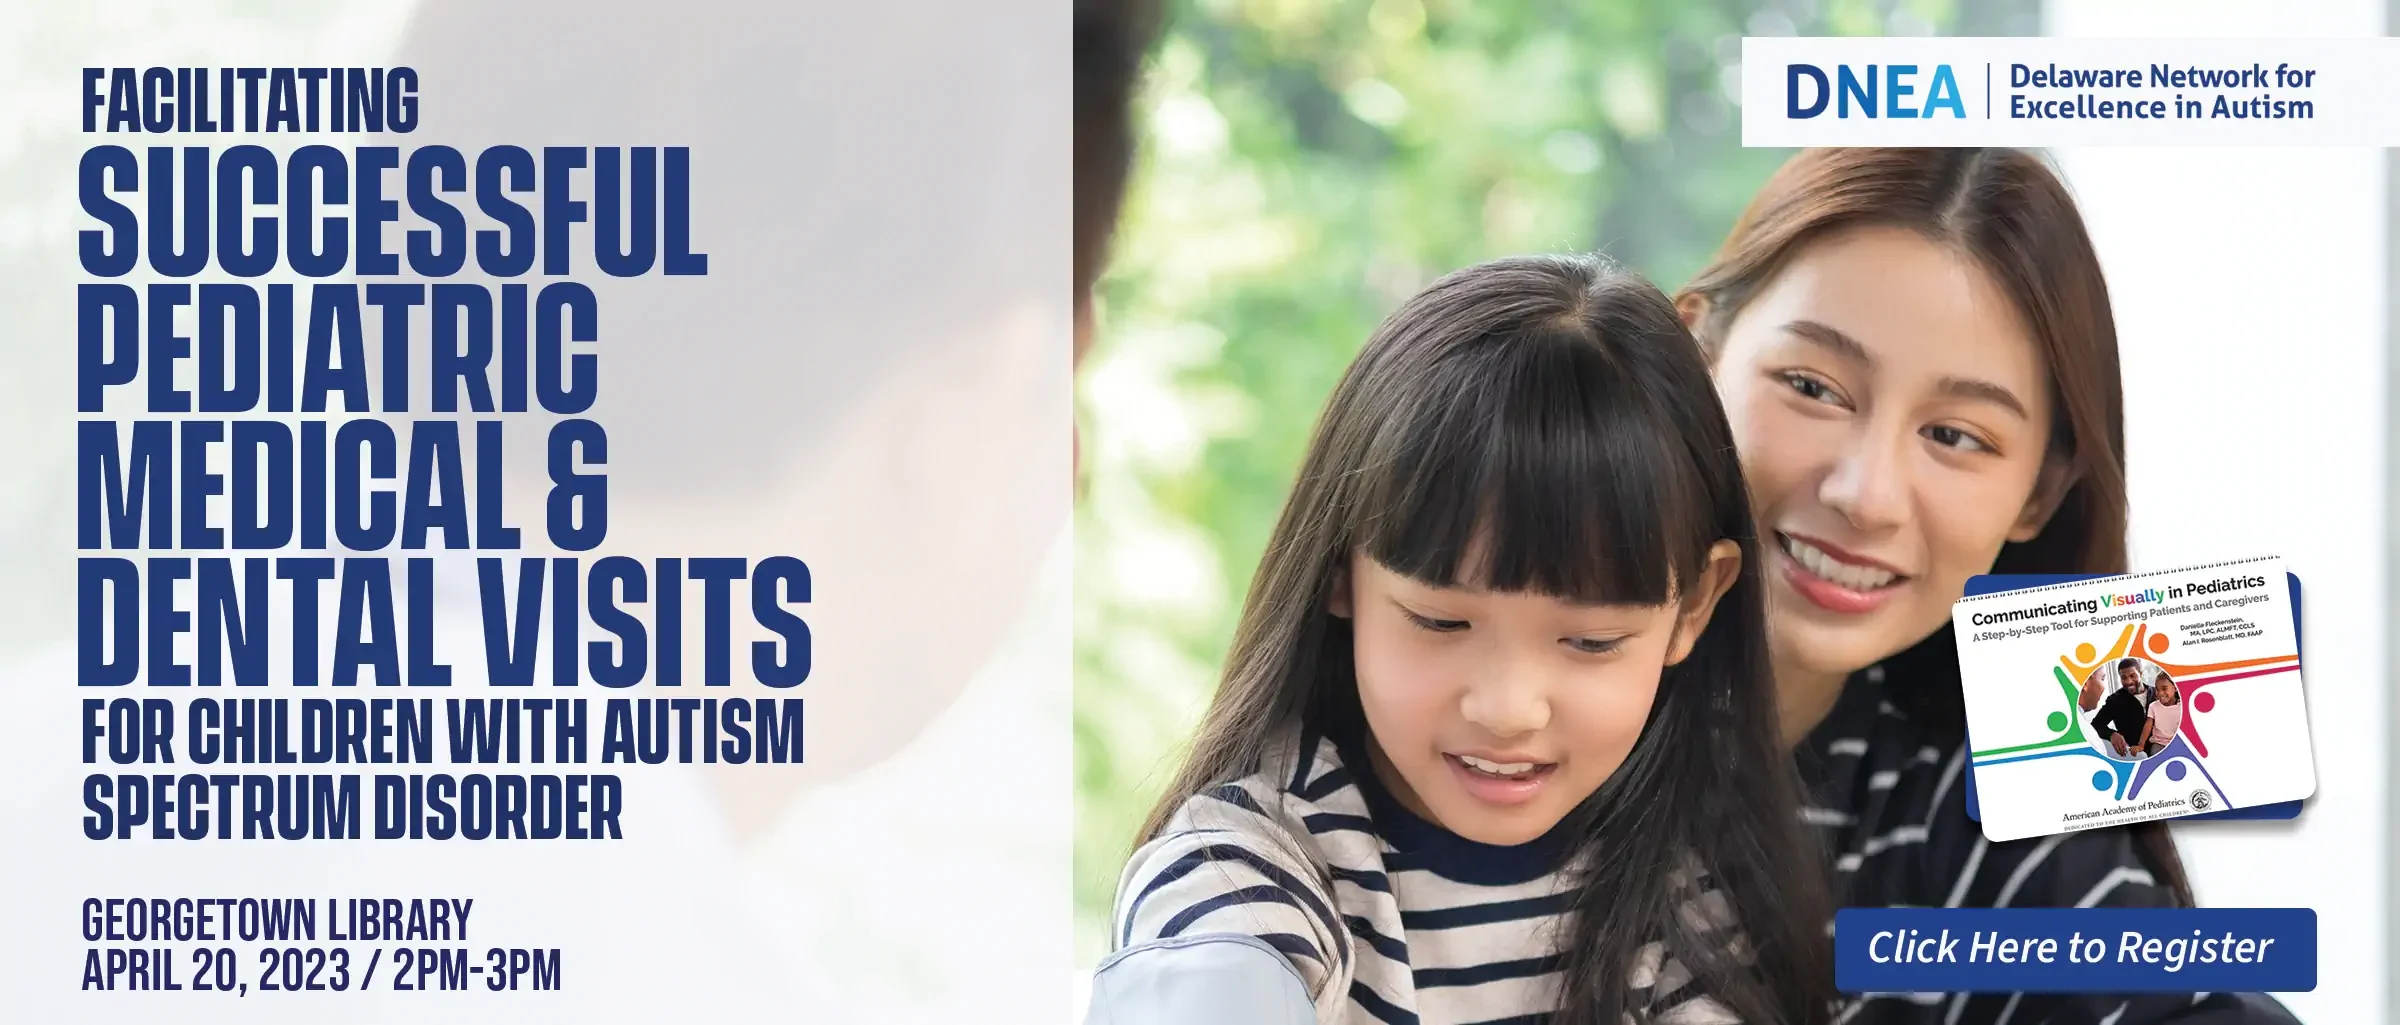 Register for "Facilitating Successful Pediatric Medical and Dental Visits for Children with Autism Spectrum Disorder" at the Georgetown Library April 20, 2023 2-3 p.m.